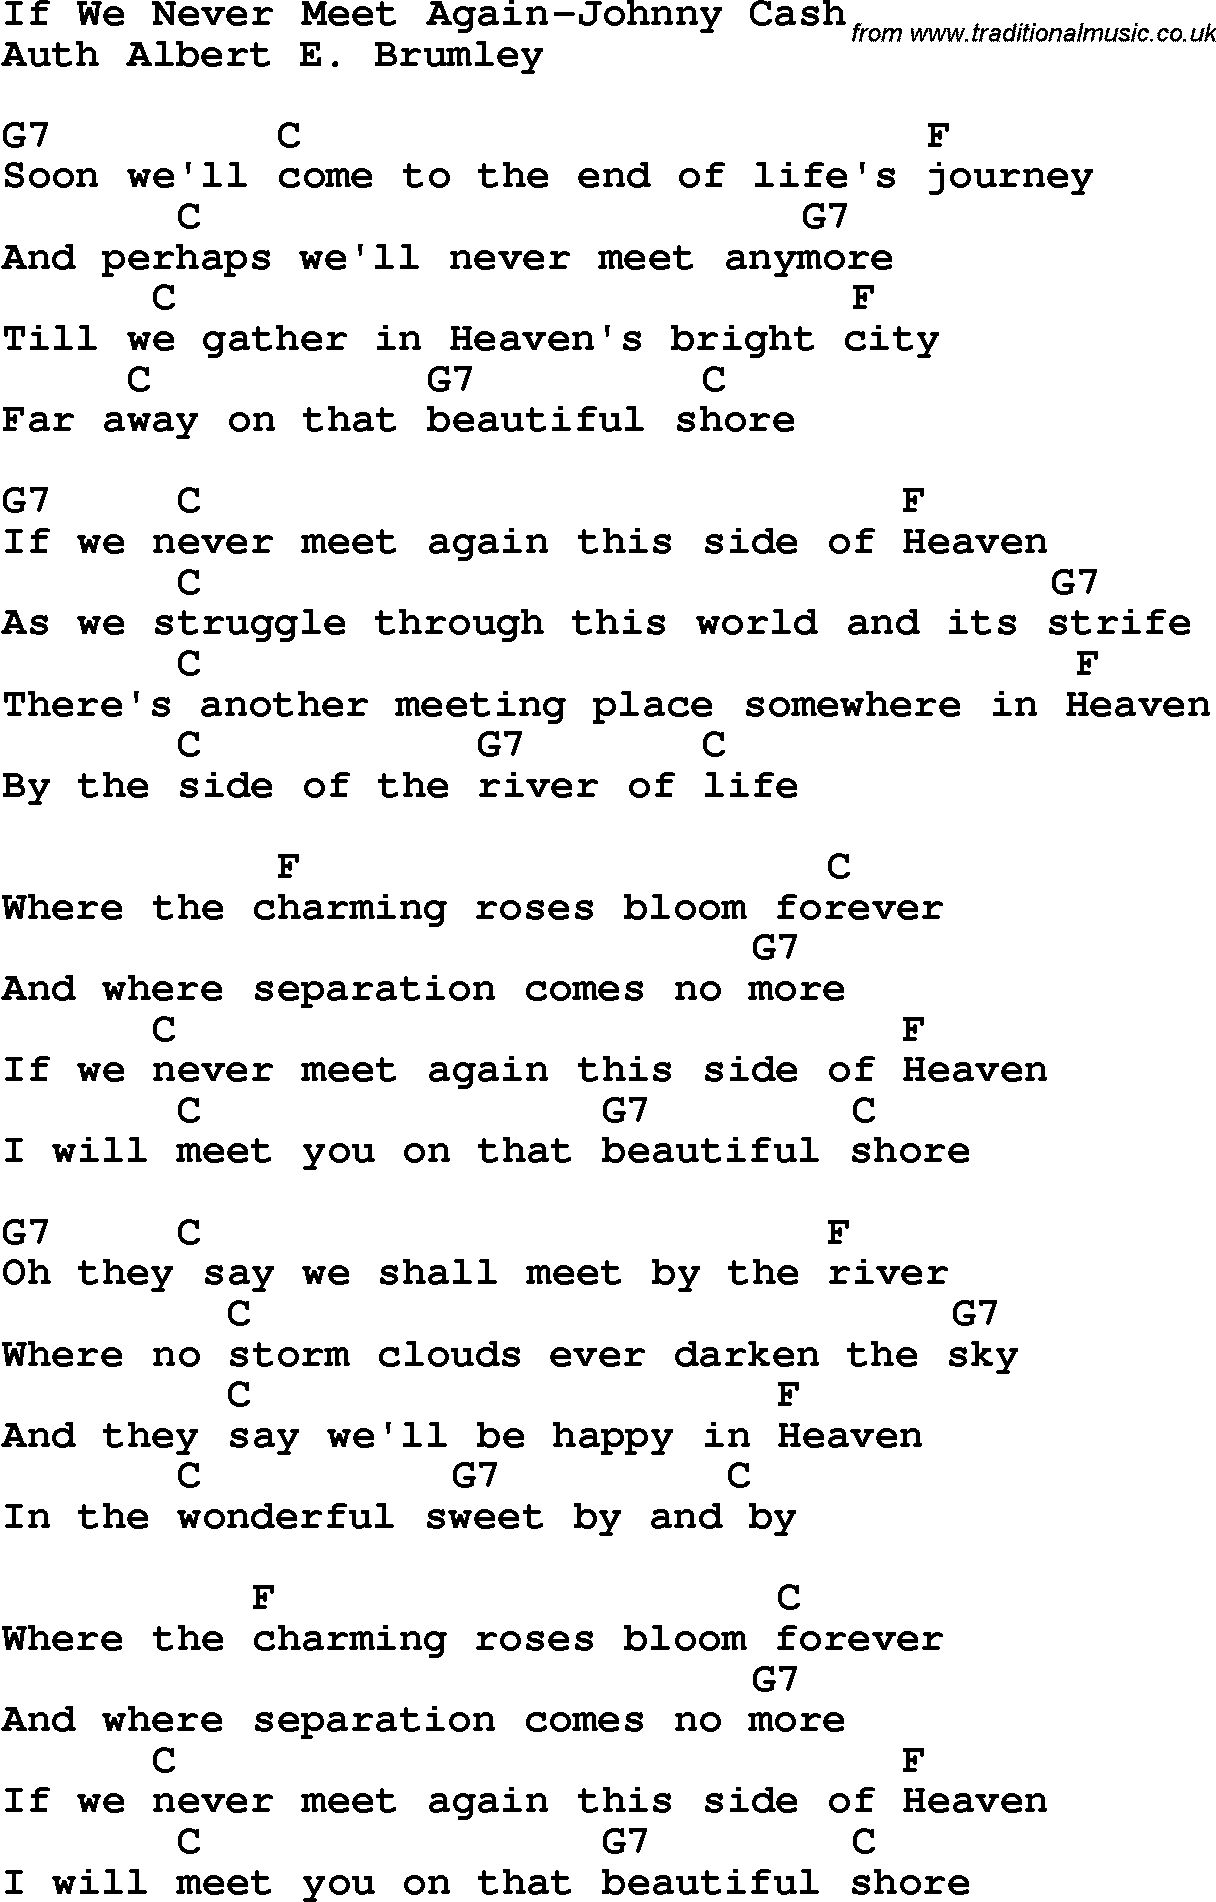 Country, Southern and Bluegrass Gospel Song If We Never Meet Again-Johnny Cash lyrics and chords